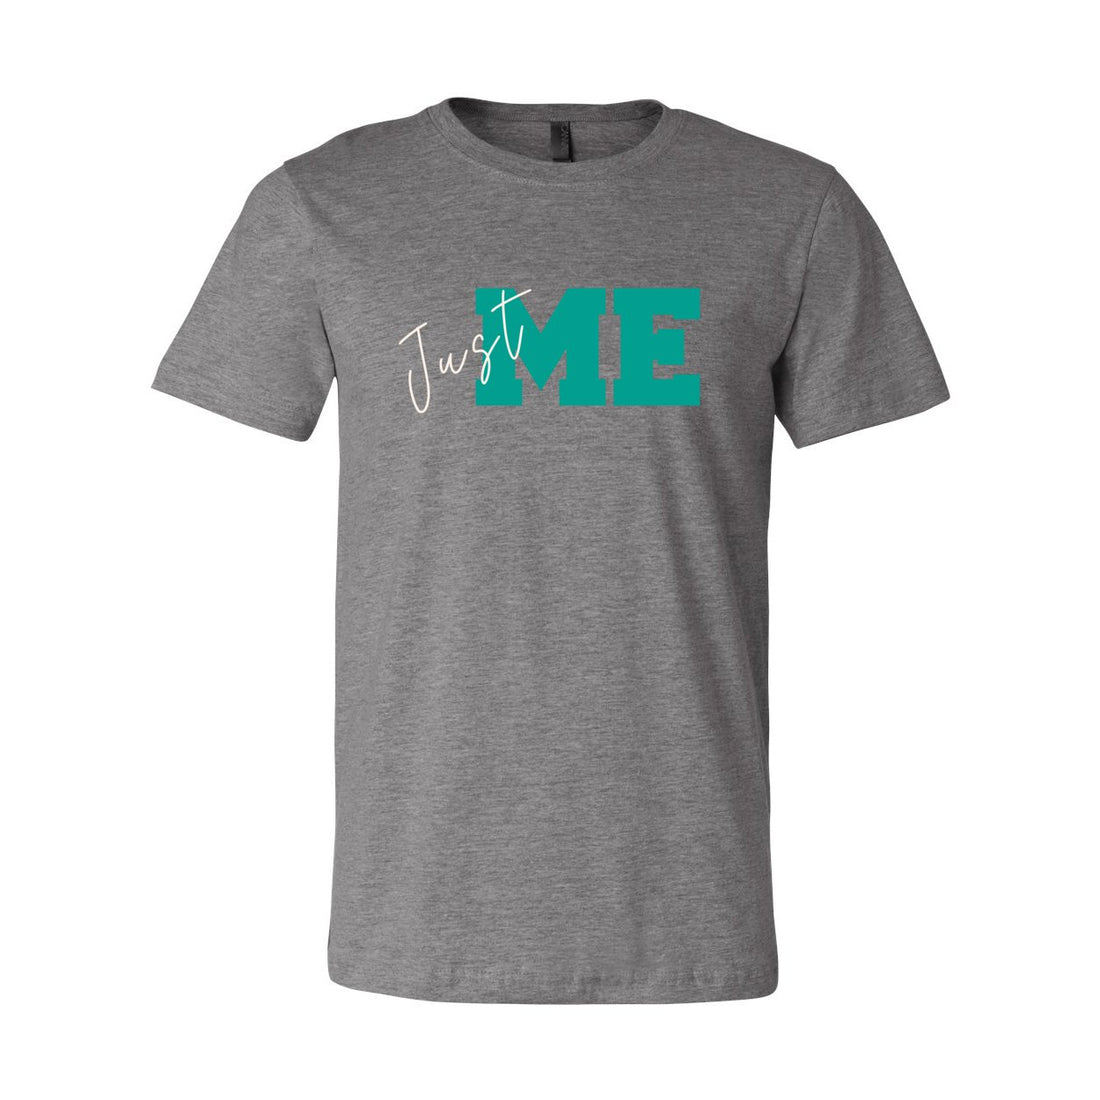 Just ME Short Sleeve Jersey Tee - T-Shirts - Positively Sassy - Just ME Short Sleeve Jersey Tee